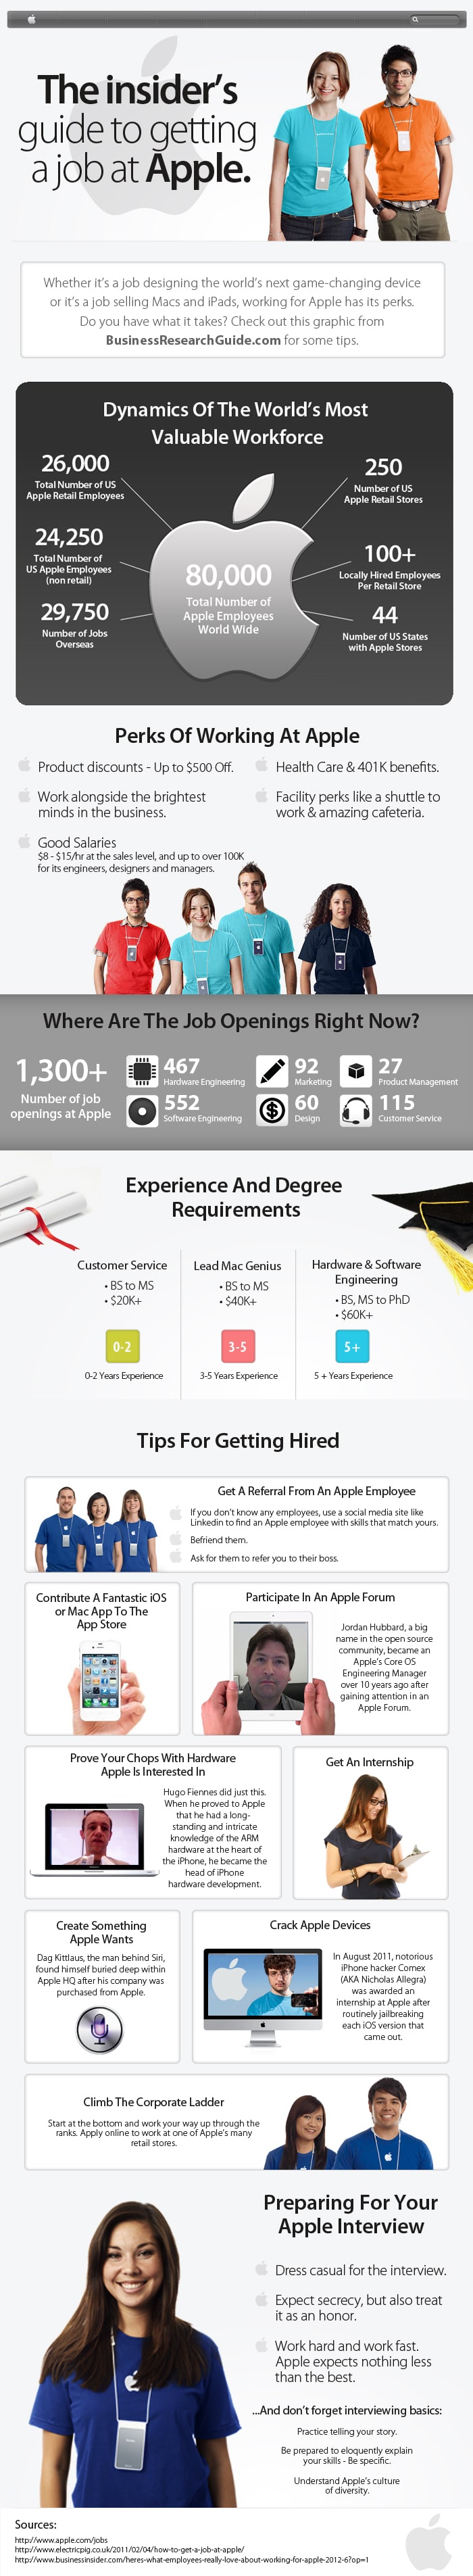 How To Get A Job At Apple: An Insider’s Guide [Infographic]